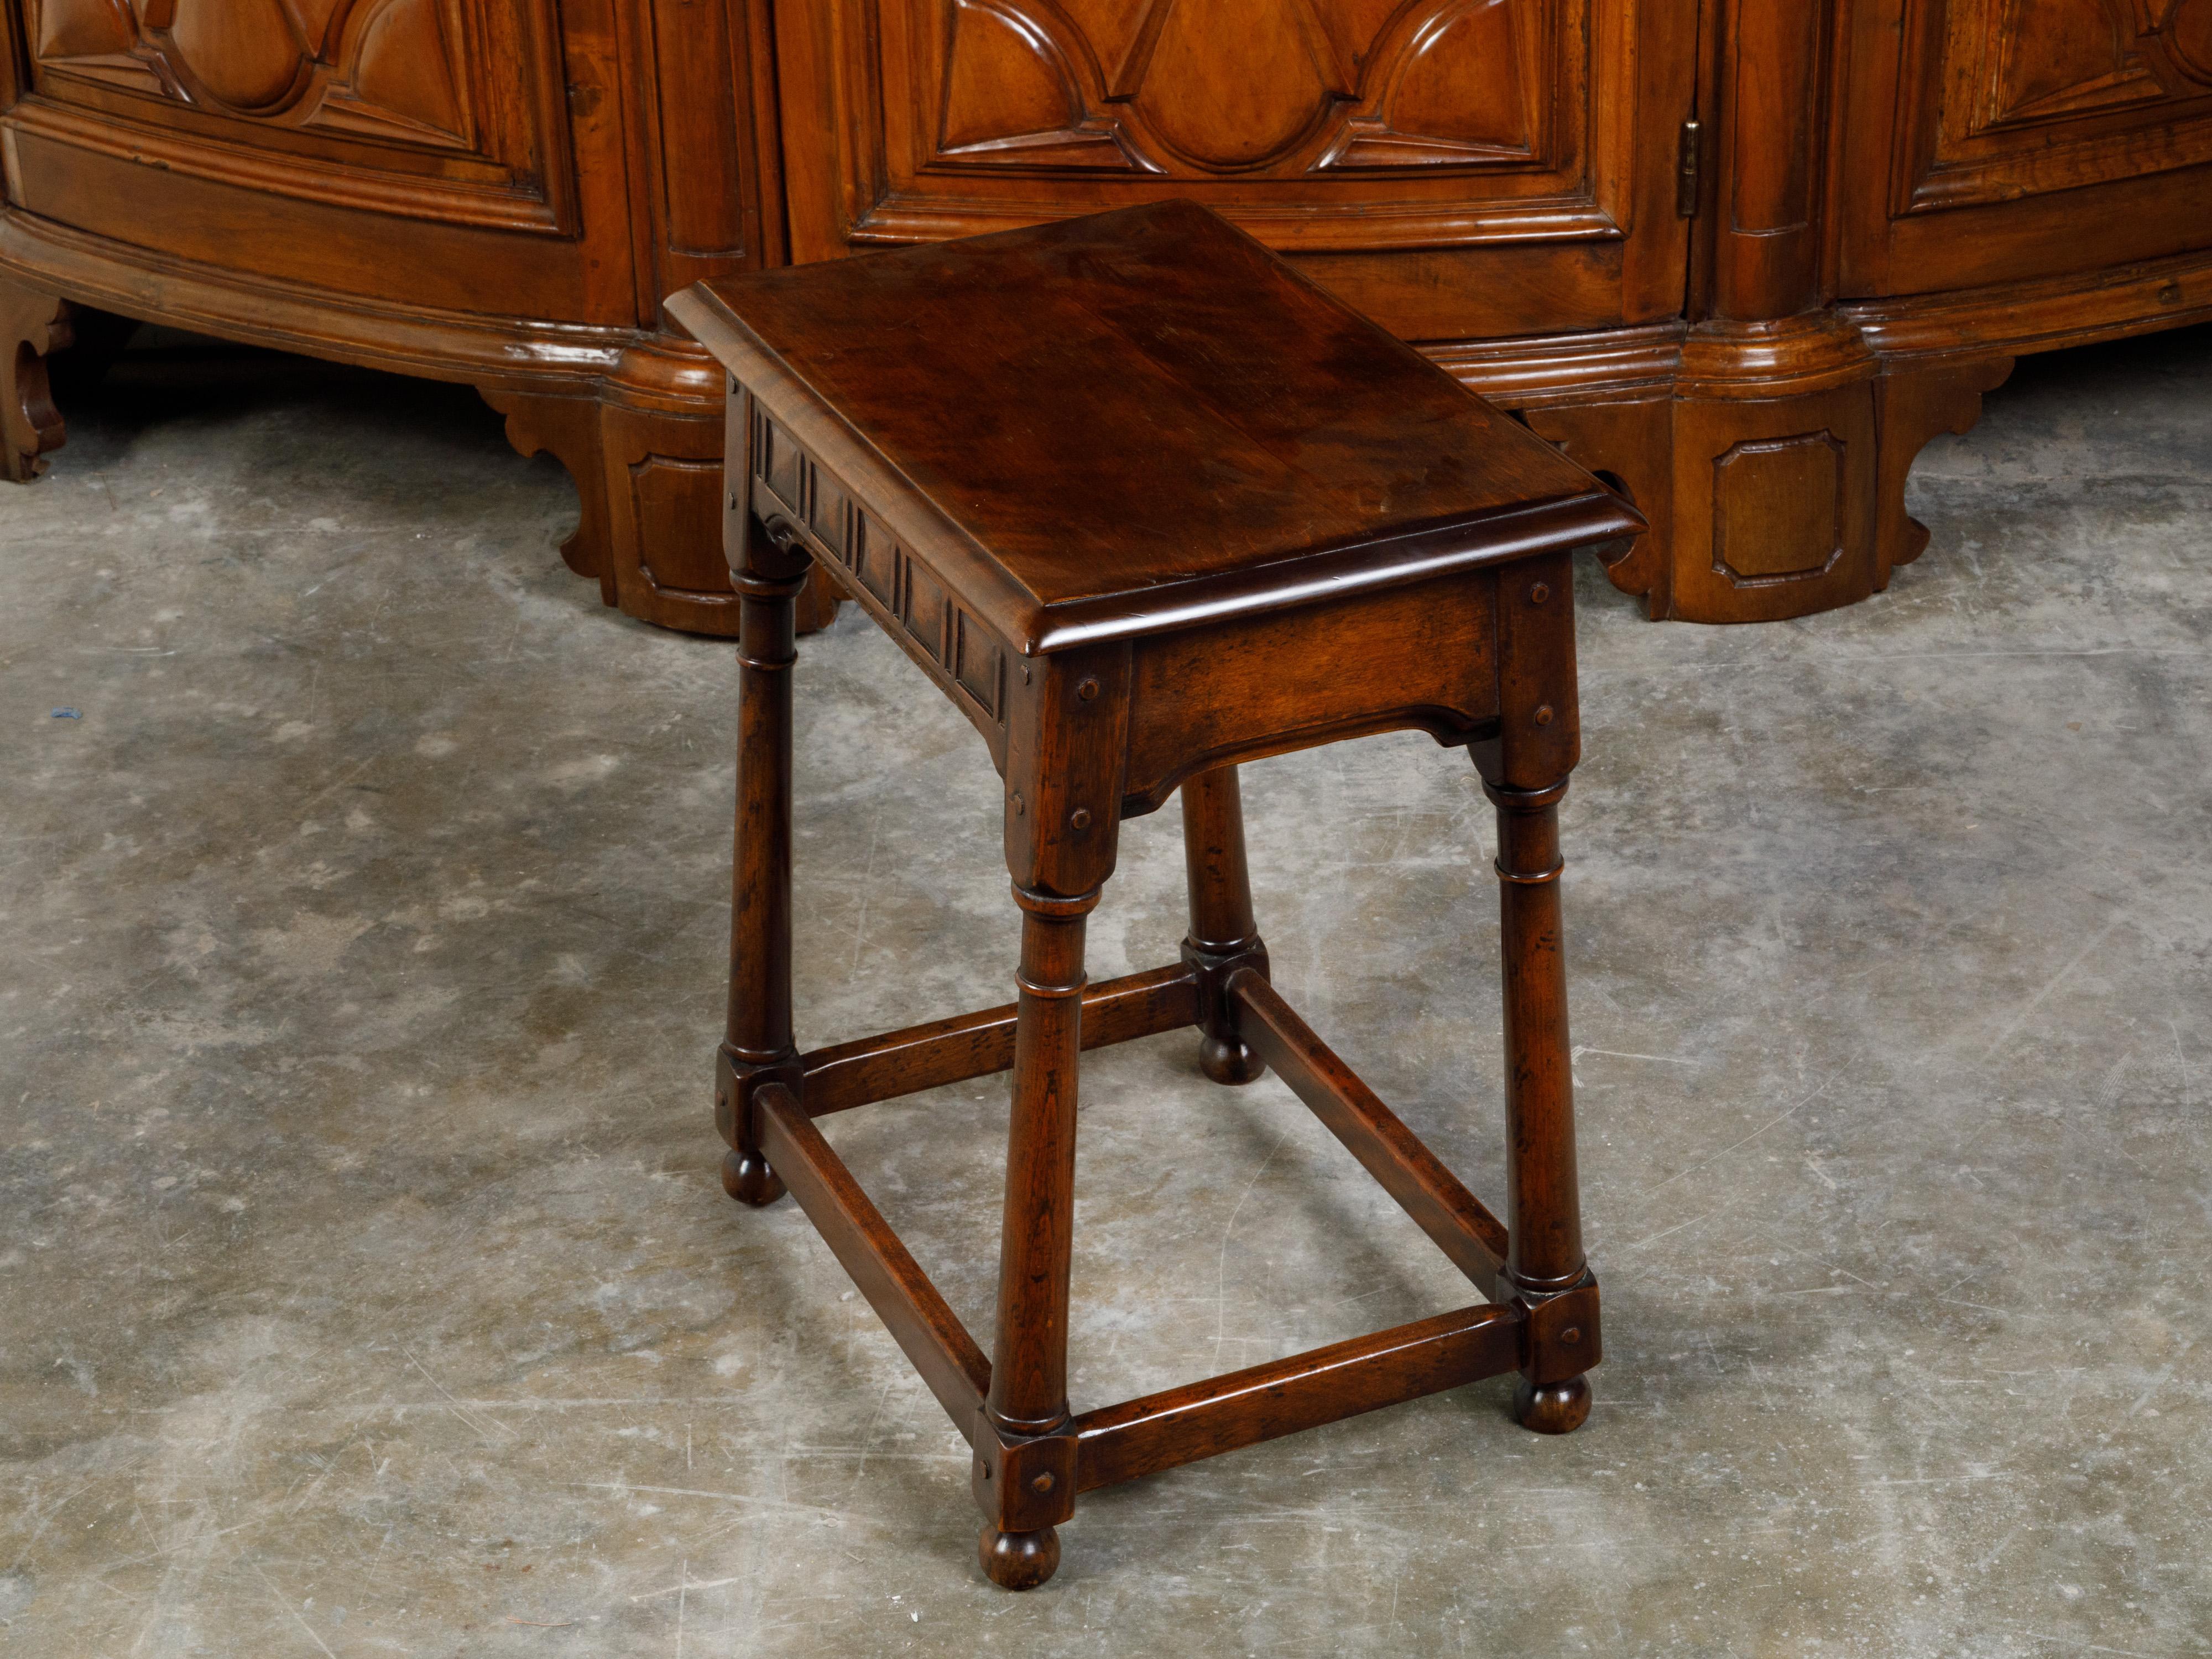 English Midcentury Oak Joint Stool with Carved Apron, Turned Legs and Bun Feet For Sale 8